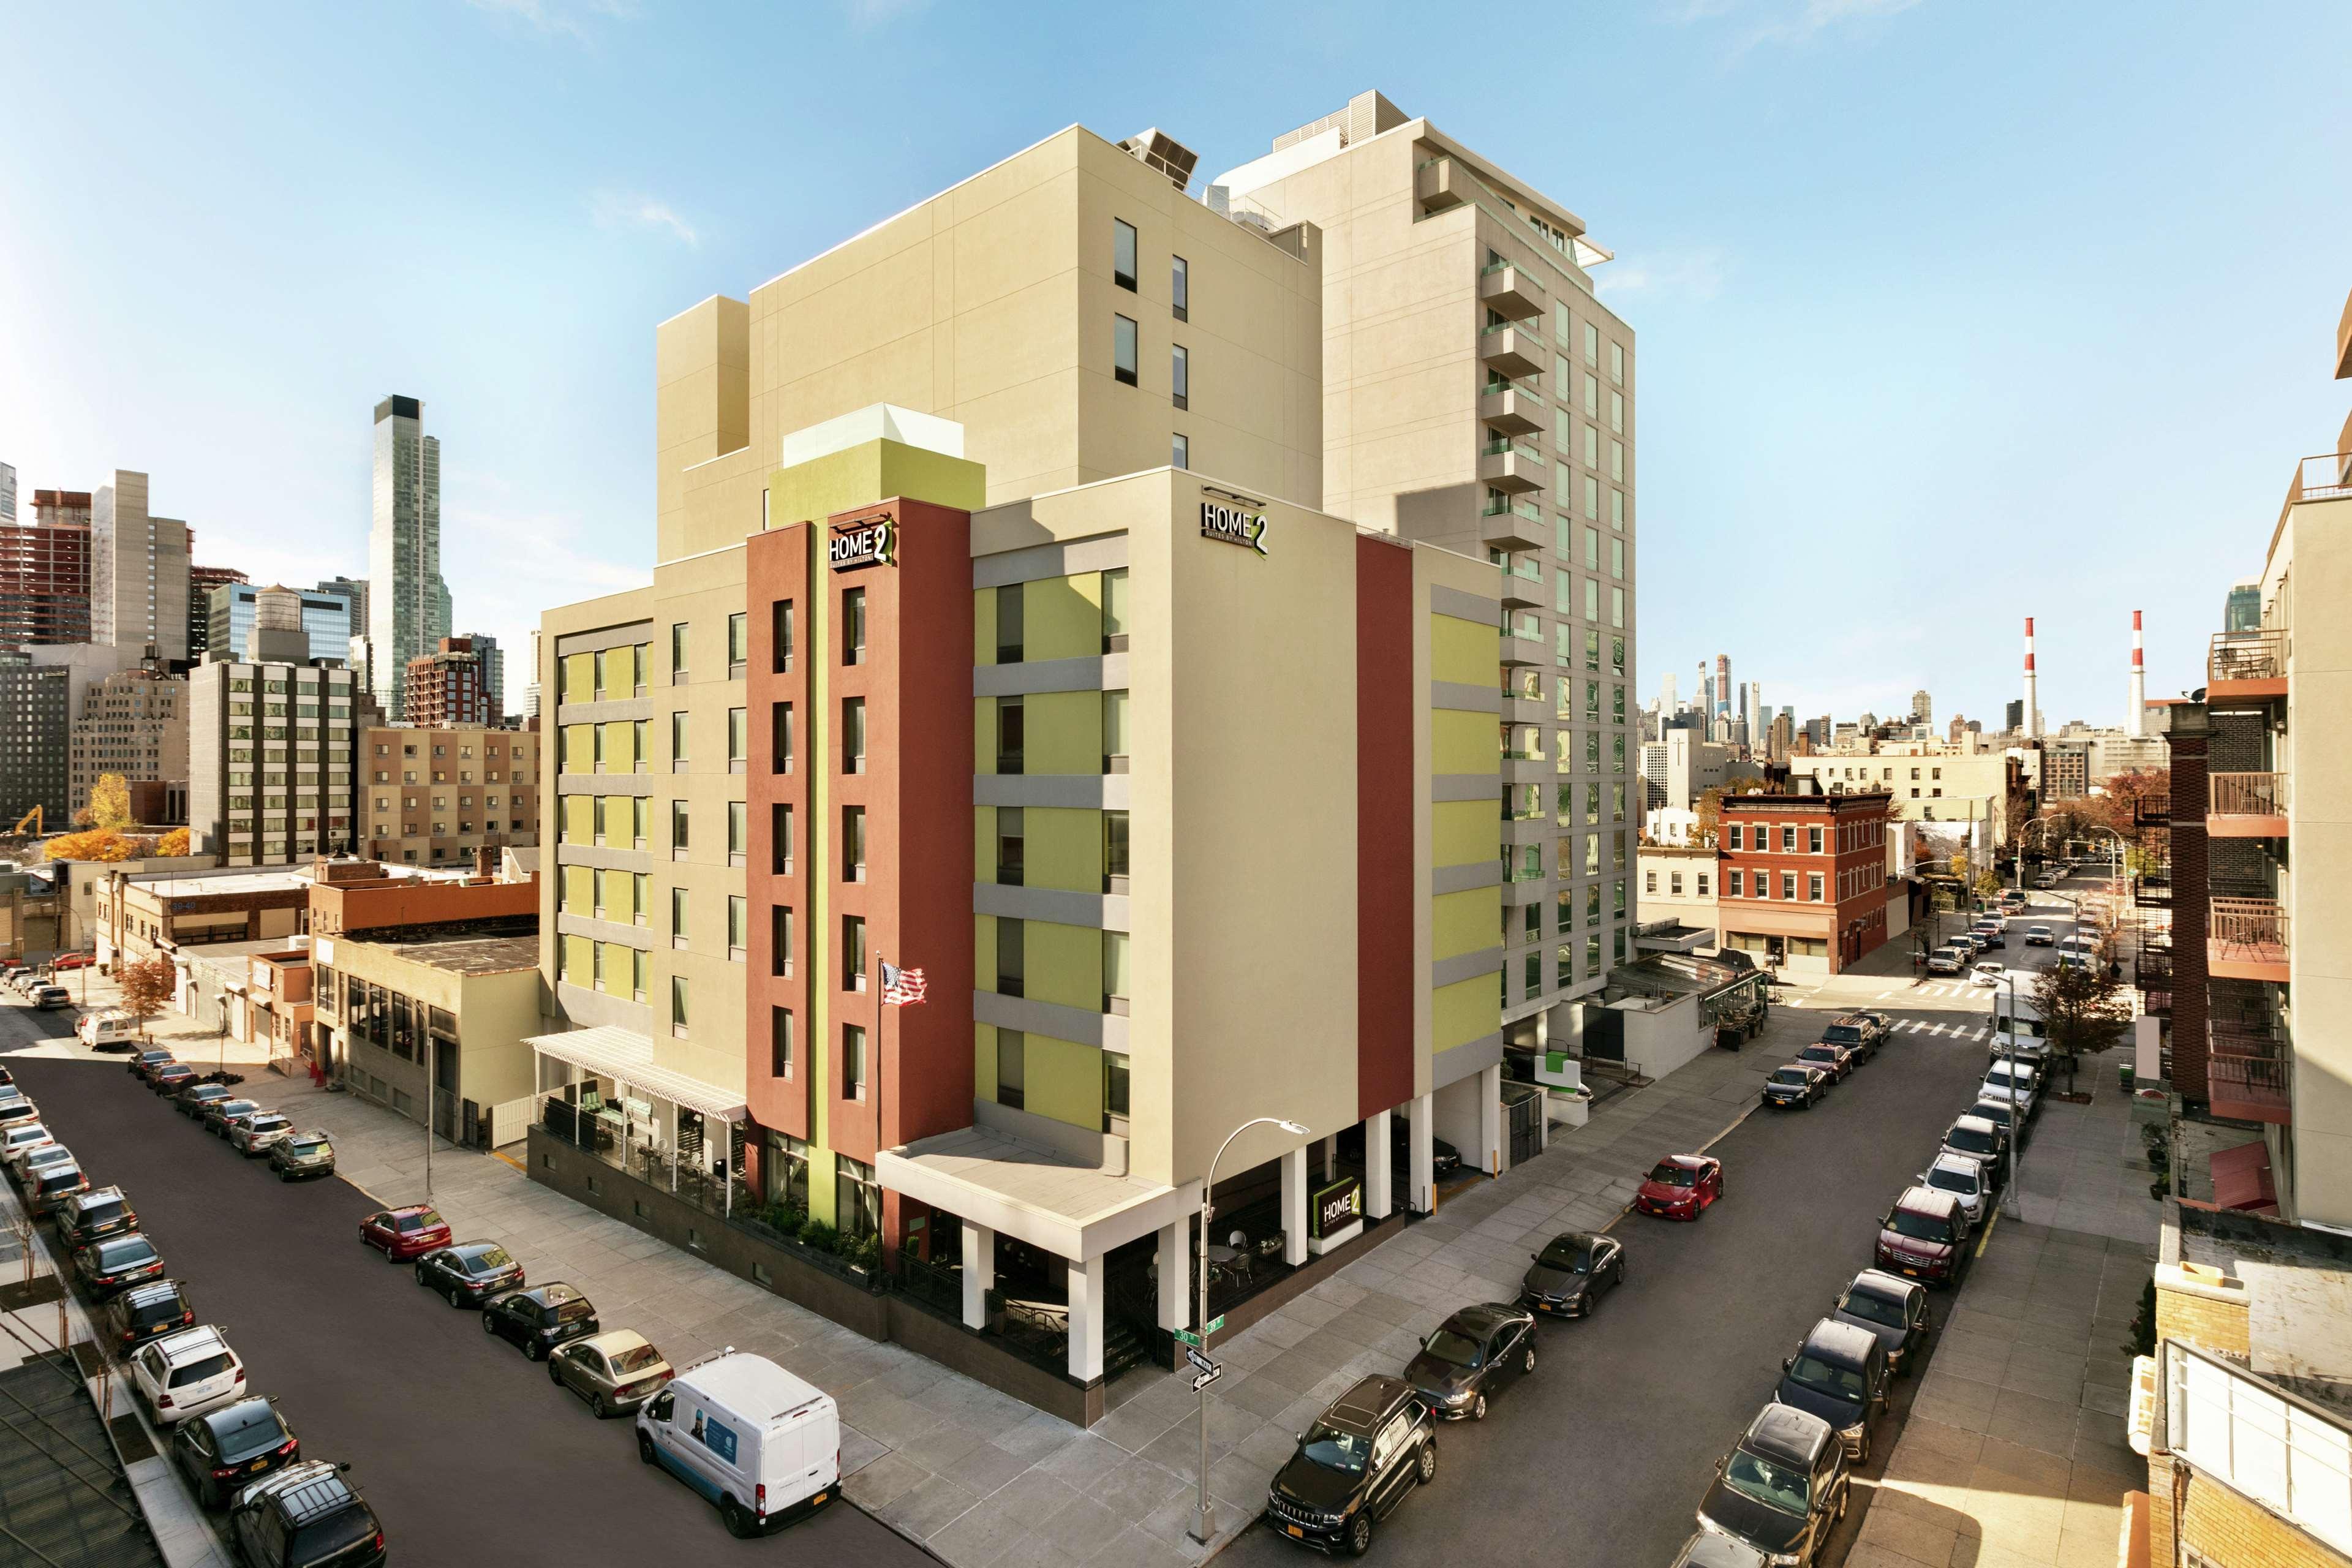 Home2 Suites by Hilton New York Long Island City/ Manhattan View, NY image